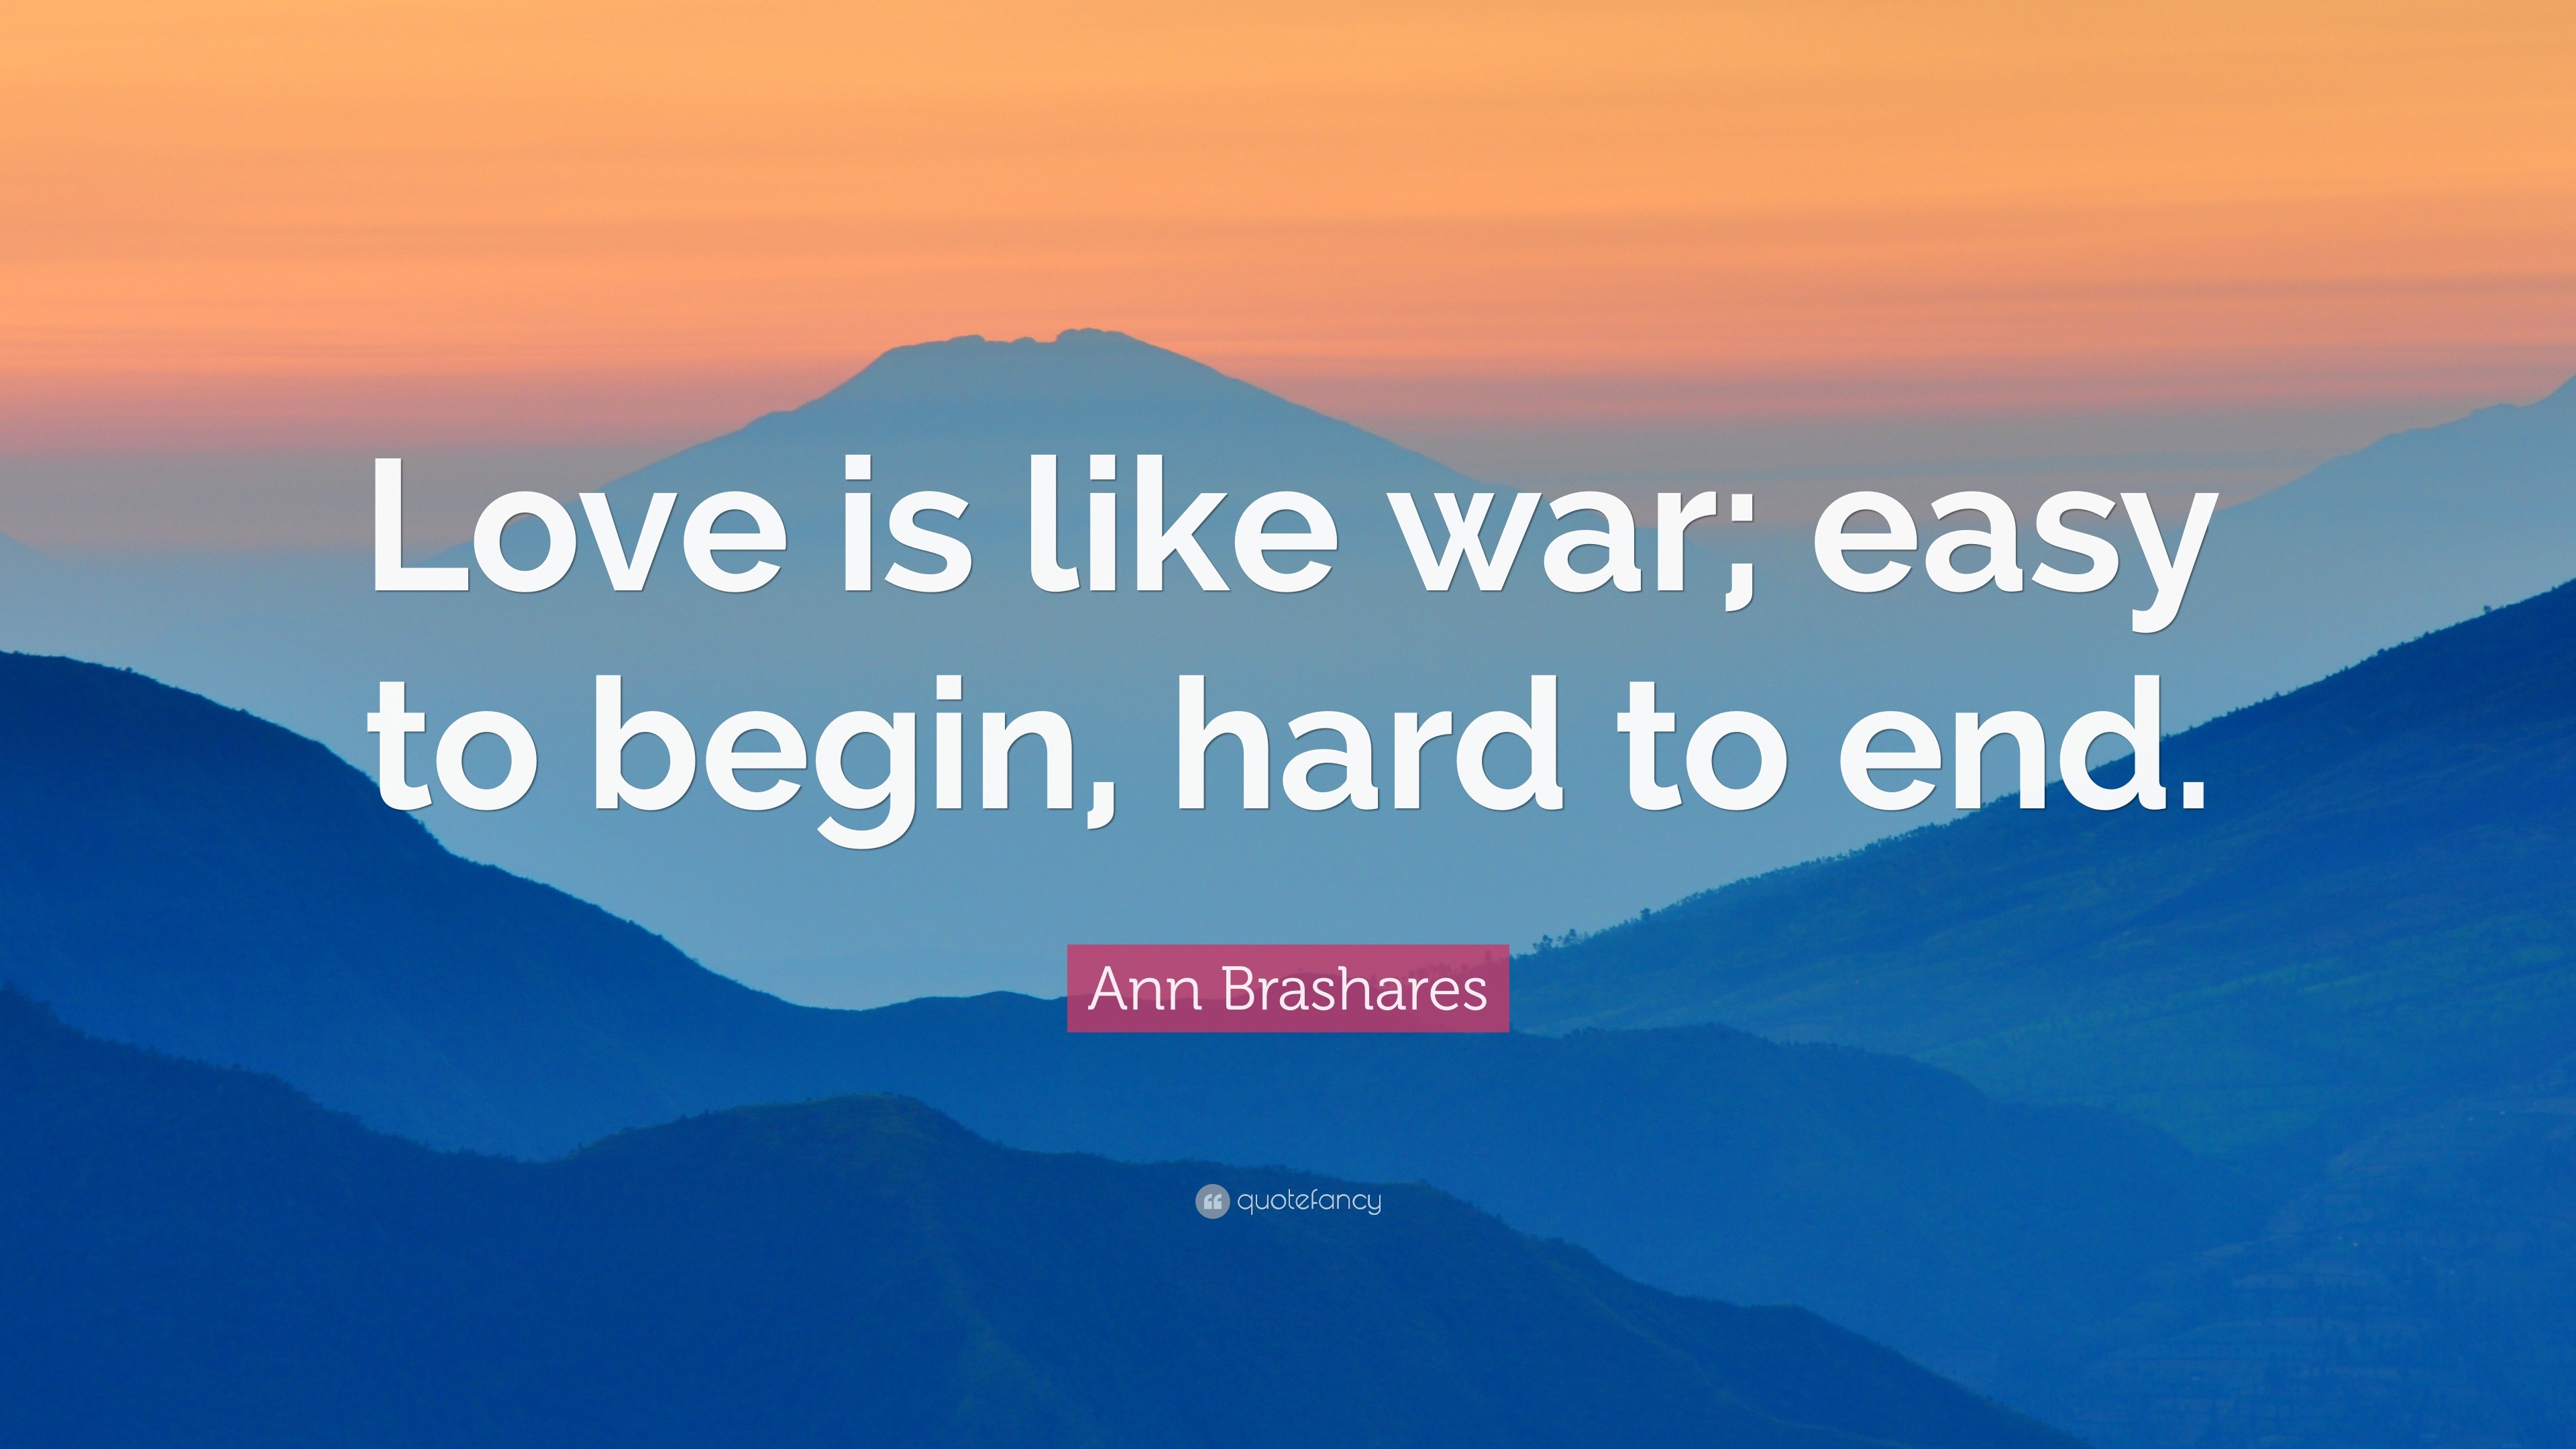 Ann Brashares Quote “Love is like war easy to begin hard to